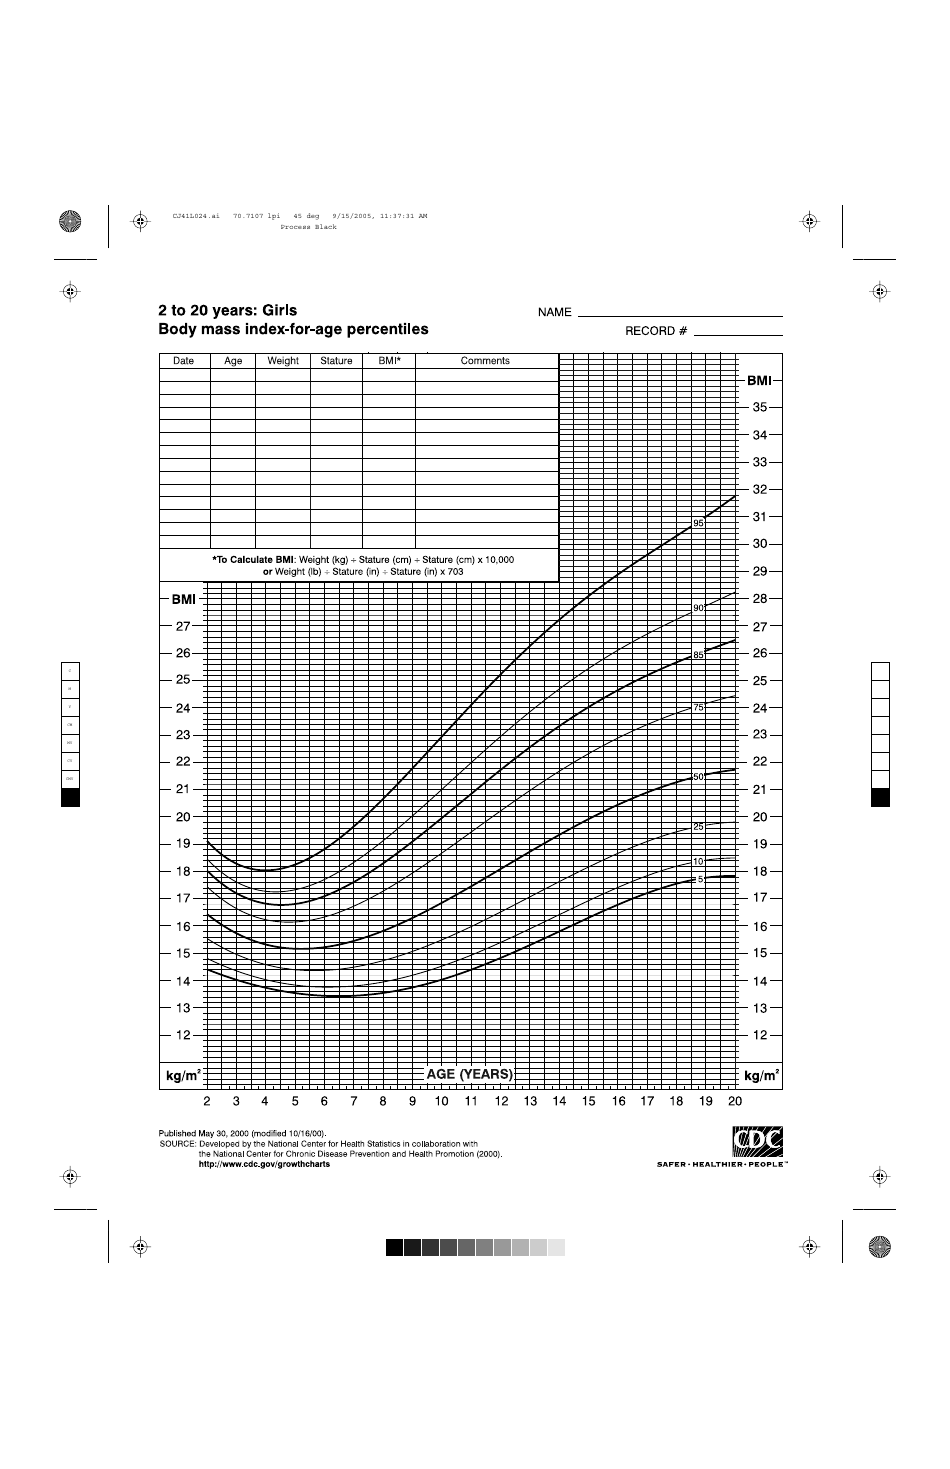 CDC Girls Growth Chart: 2 to 20 Years, Body Mass Index-For-Age Percentiles (5th - 95th Percentile), Page 1